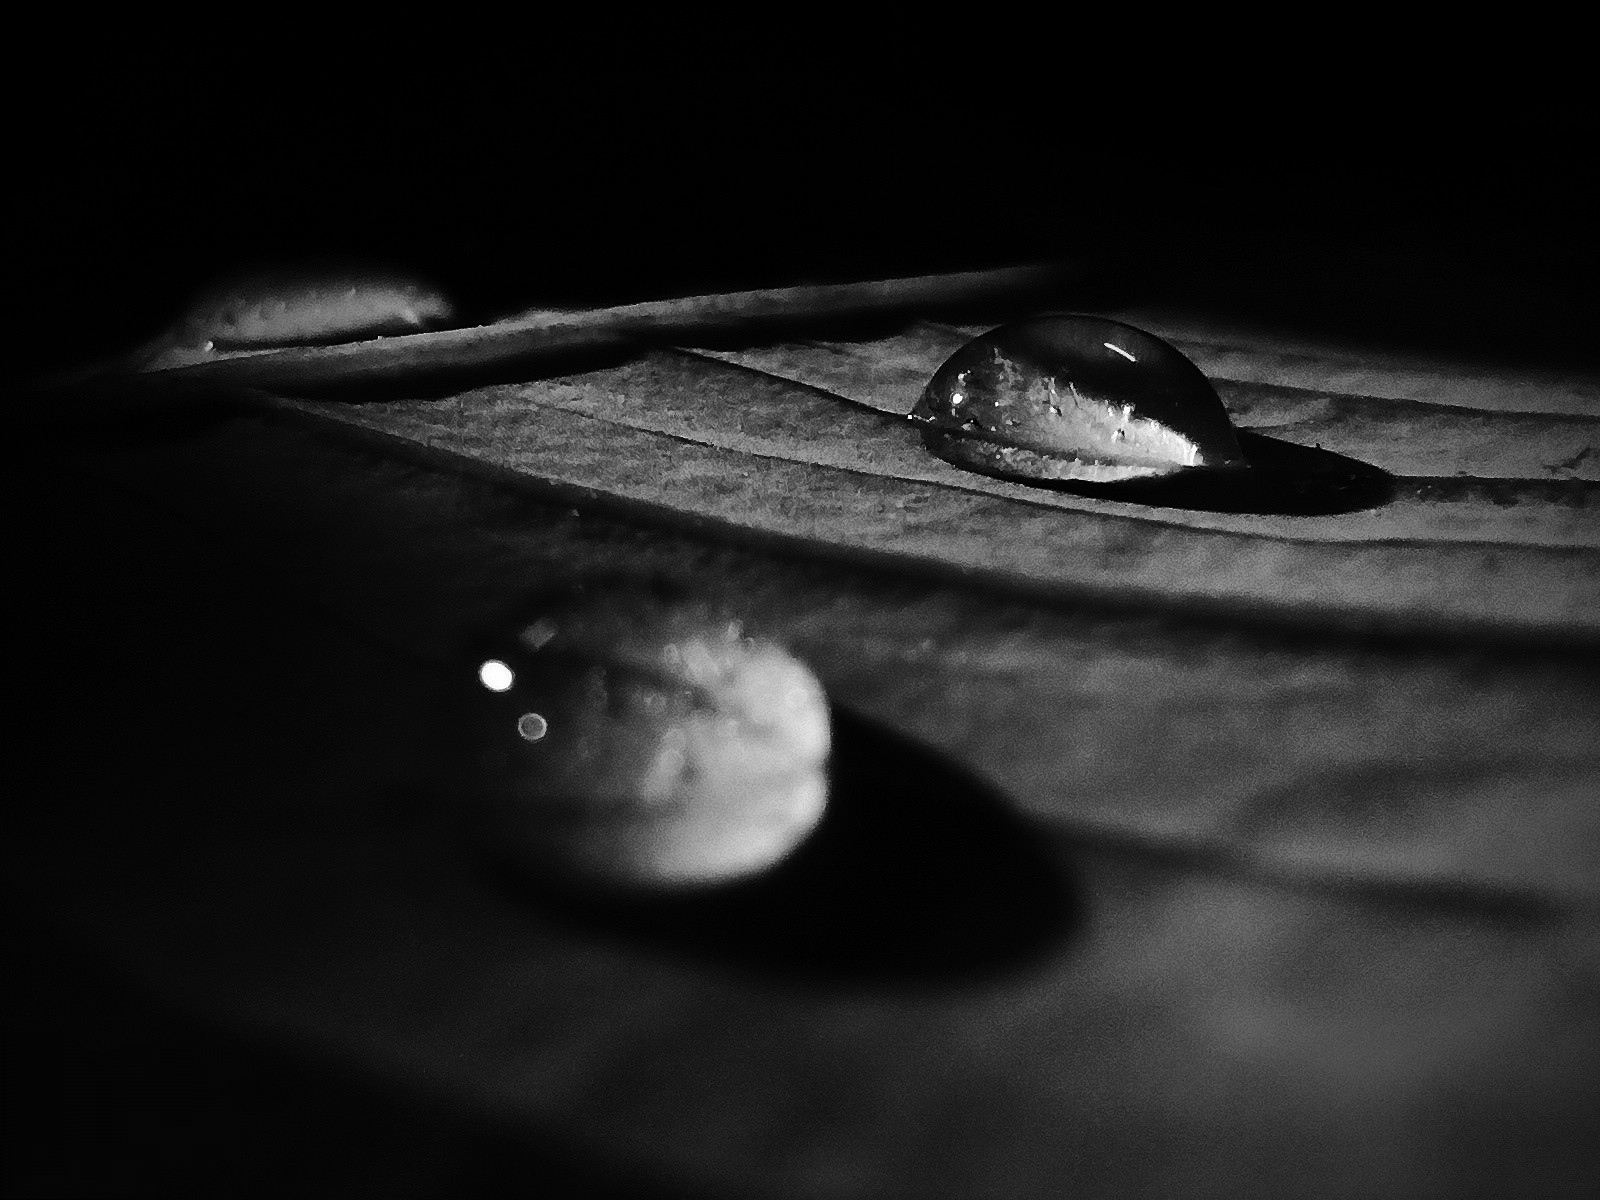 Water droplets in black and white